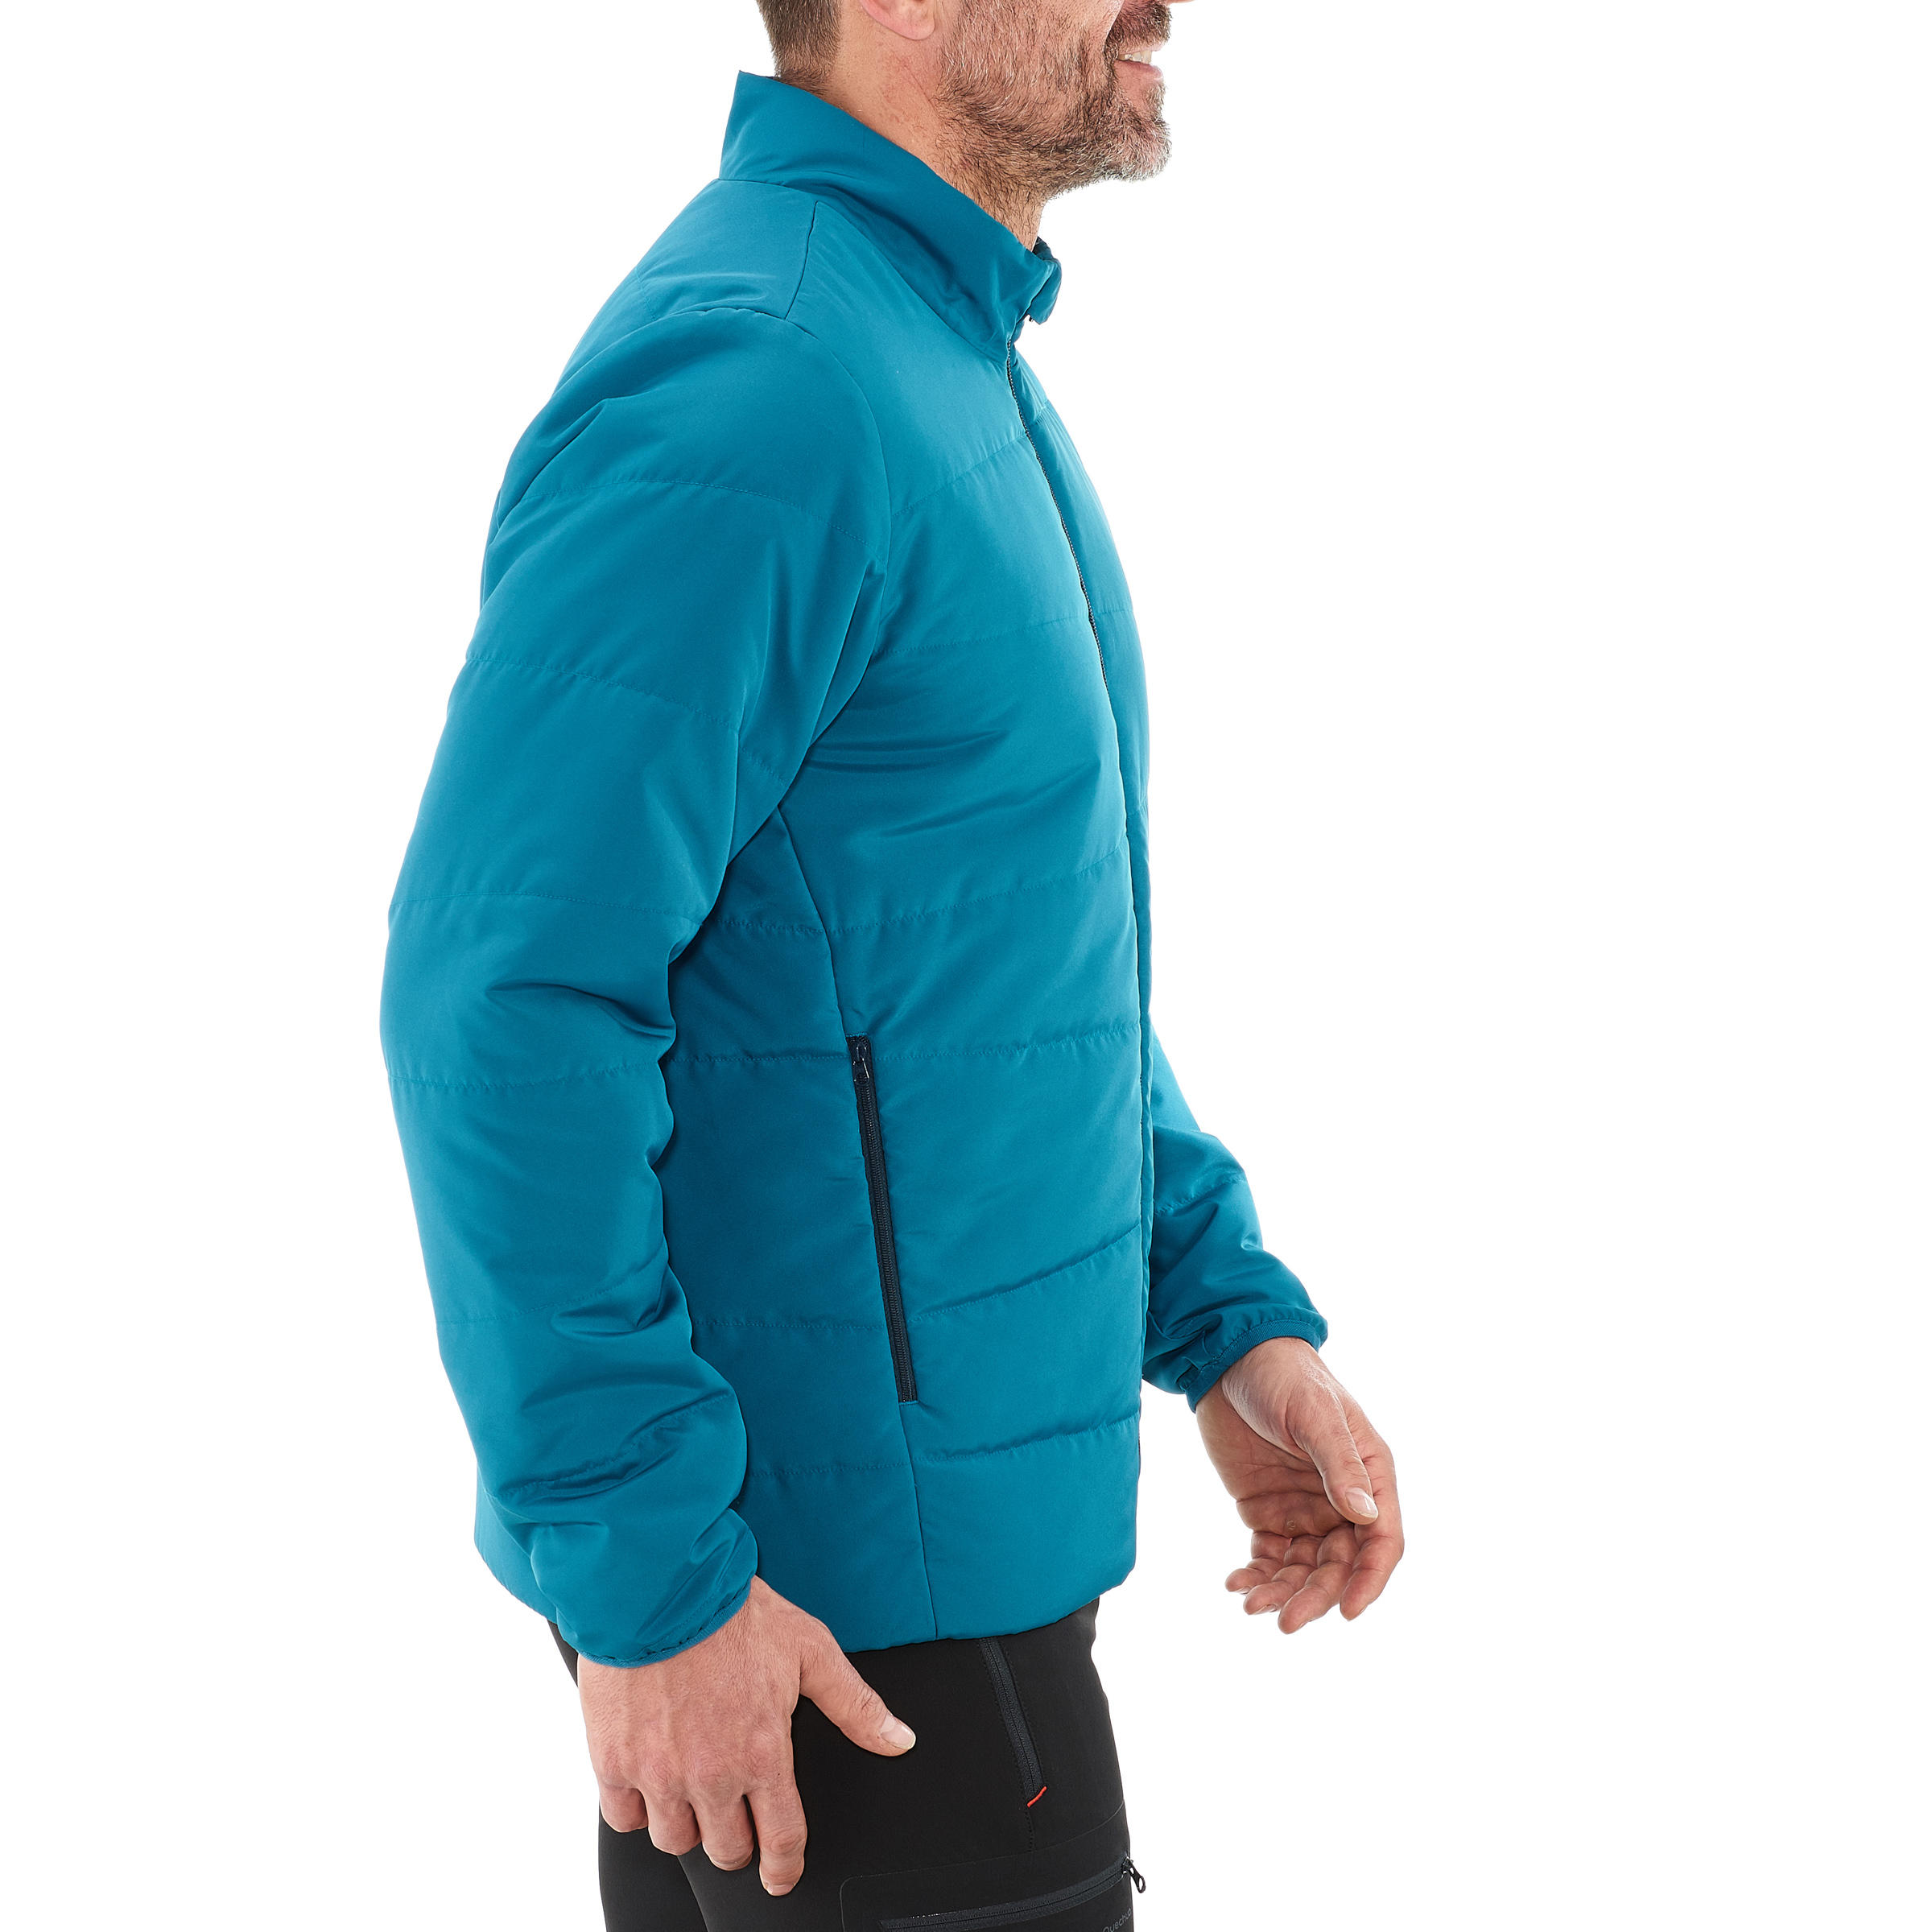 Buy Decathlon Jackets Online at Best Price in India | Myntra